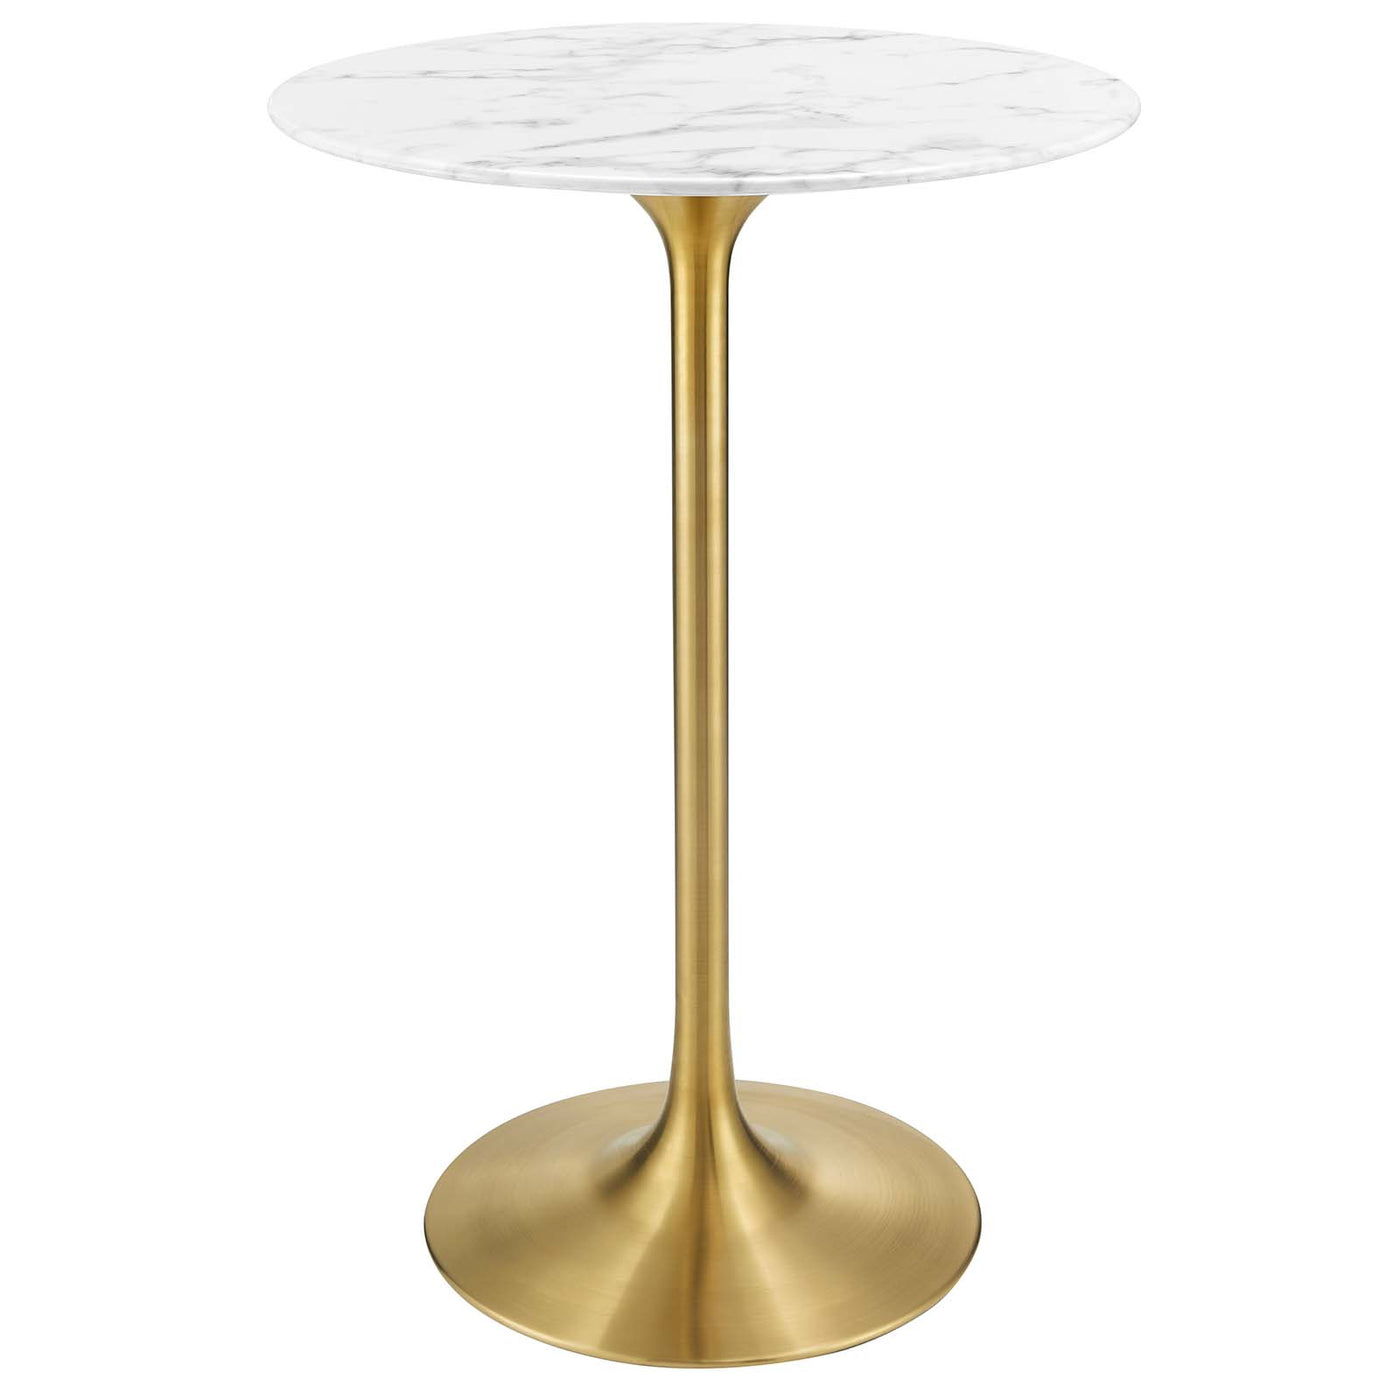 Lippa 28" Round Artificial Marble Dining Table